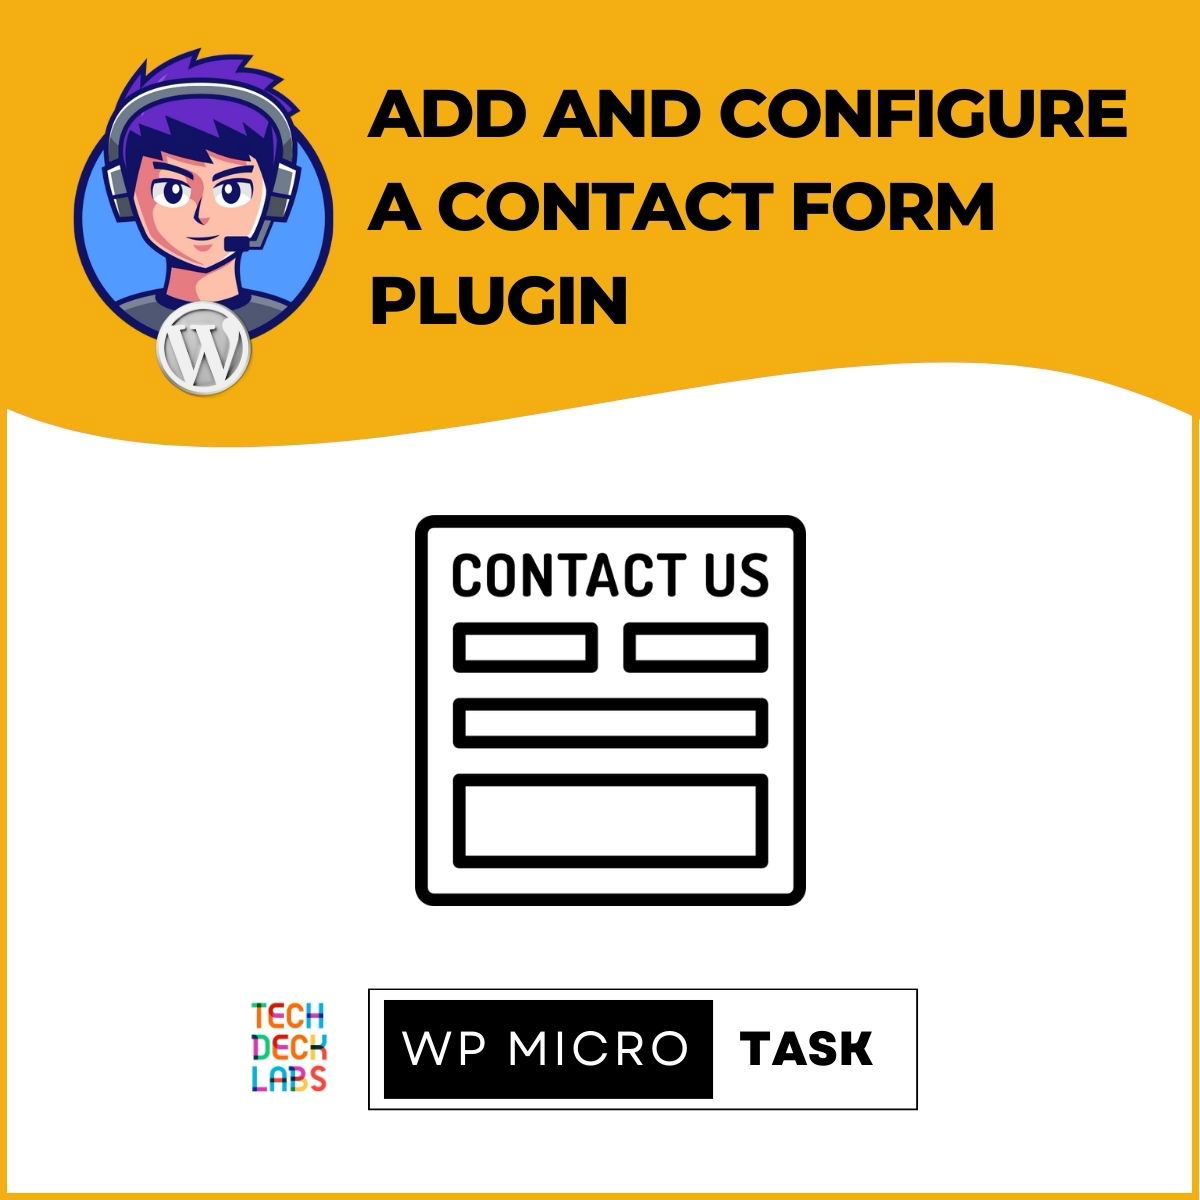 Add and configure a contact form plugin. Wordpress MicroTask